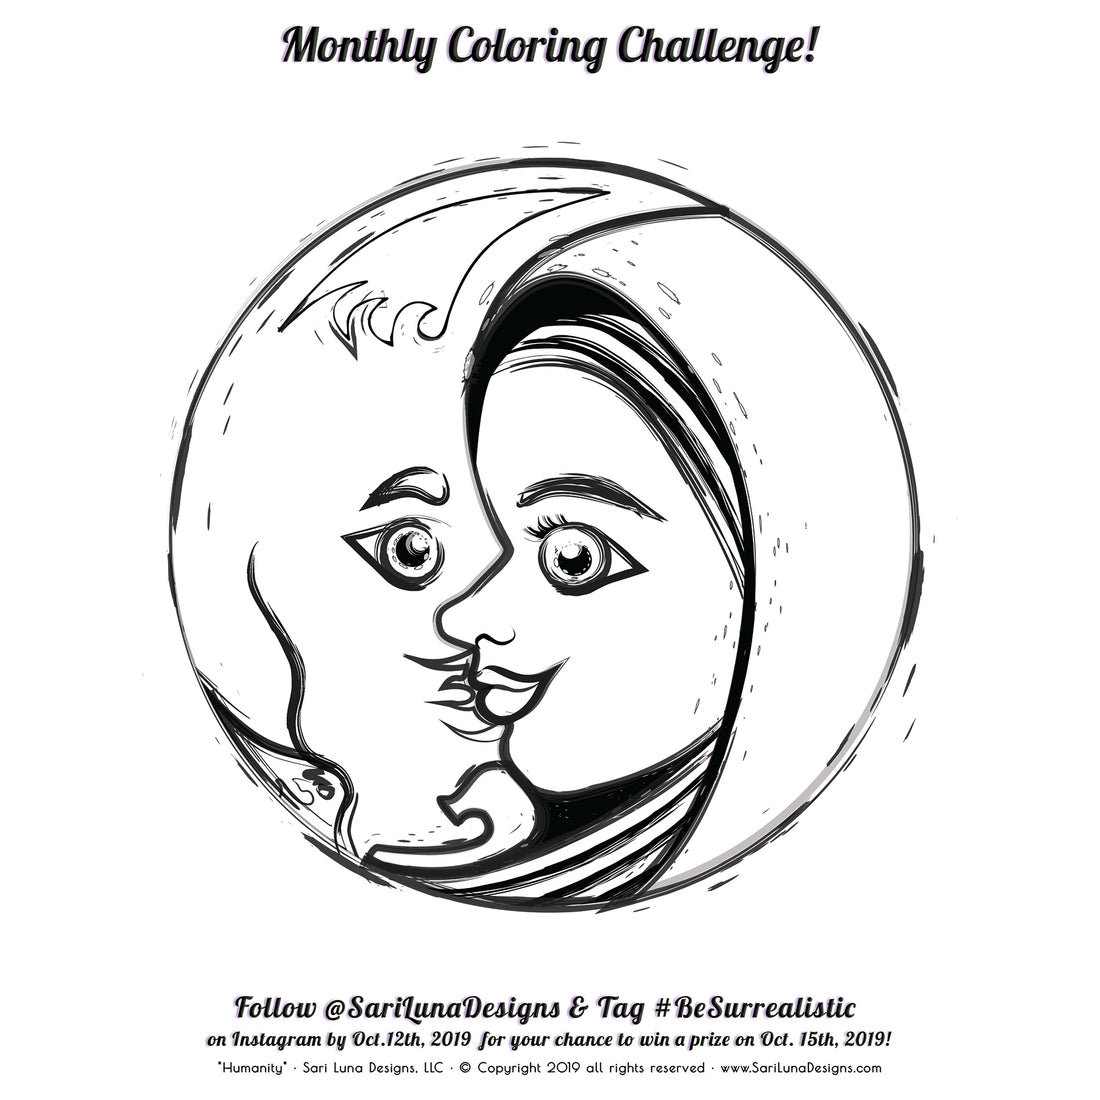 Monthly Coloring Challenge - Humanity